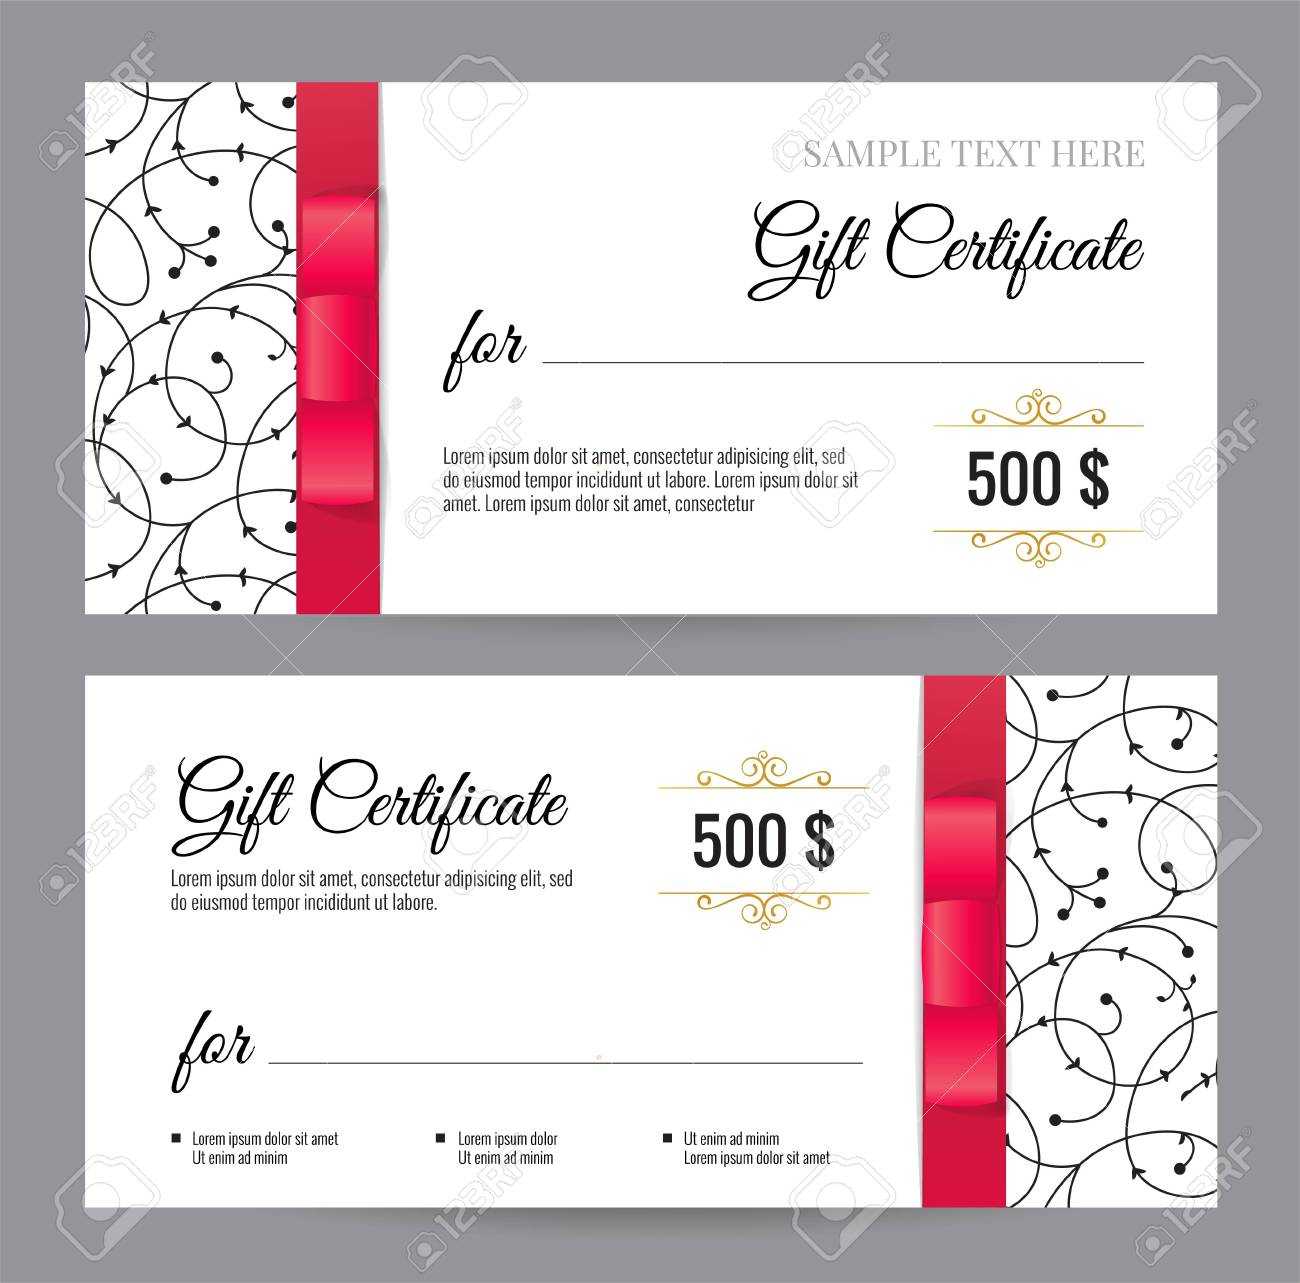 Black And White Gift Voucher Template With Floral Pattern And.. For Black And White Gift Certificate Template Free